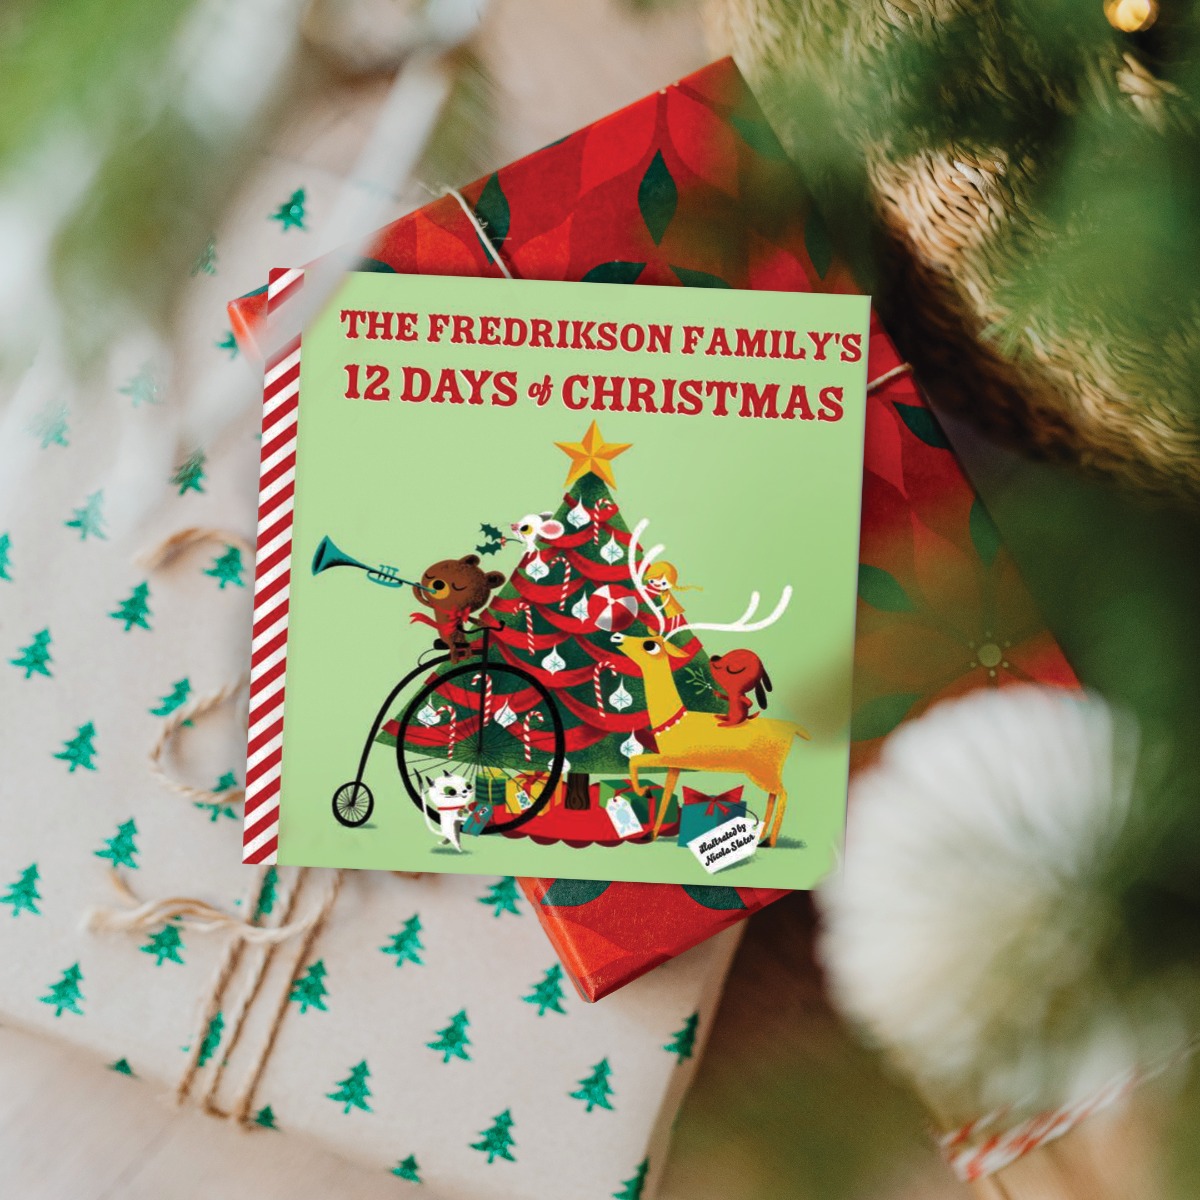 Our Family’s 12 Days of Christmas Personalized Book